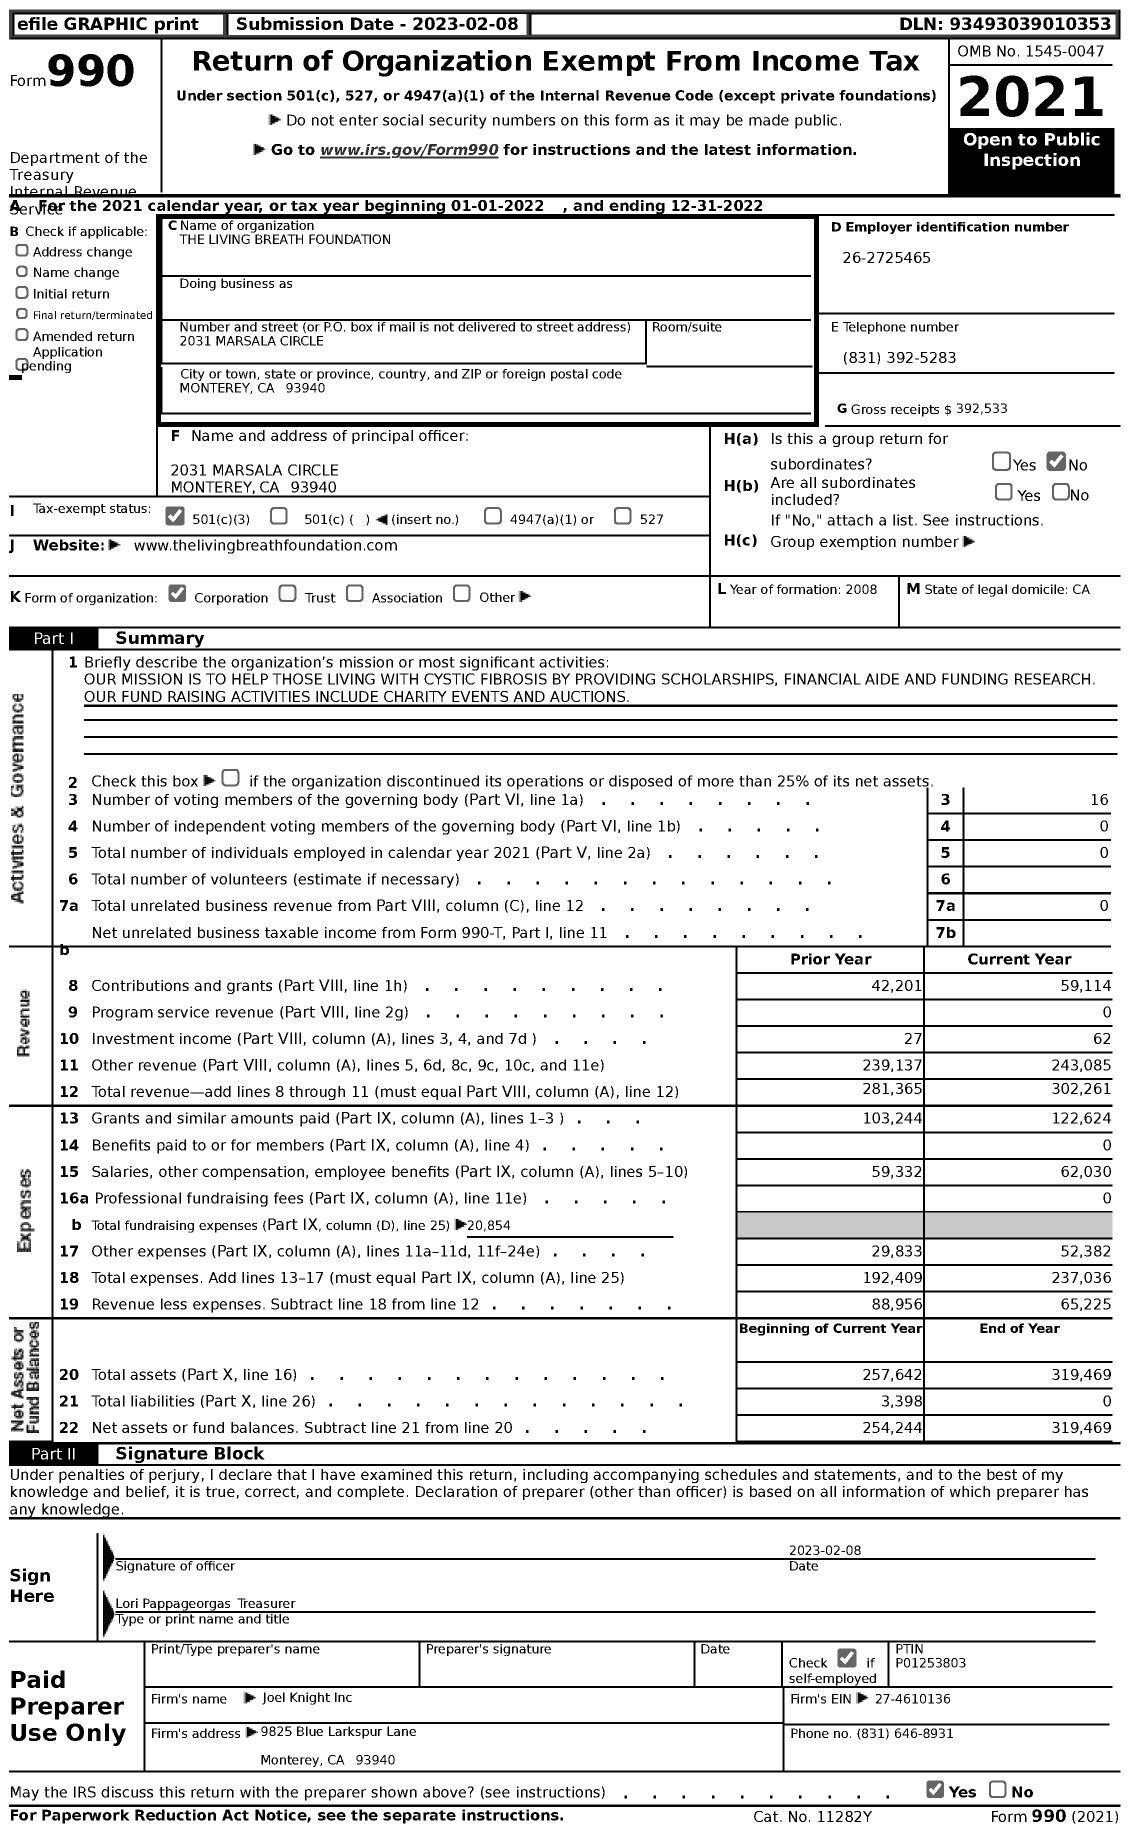 Image of first page of 2022 Form 990 for The Living Breath Foundation